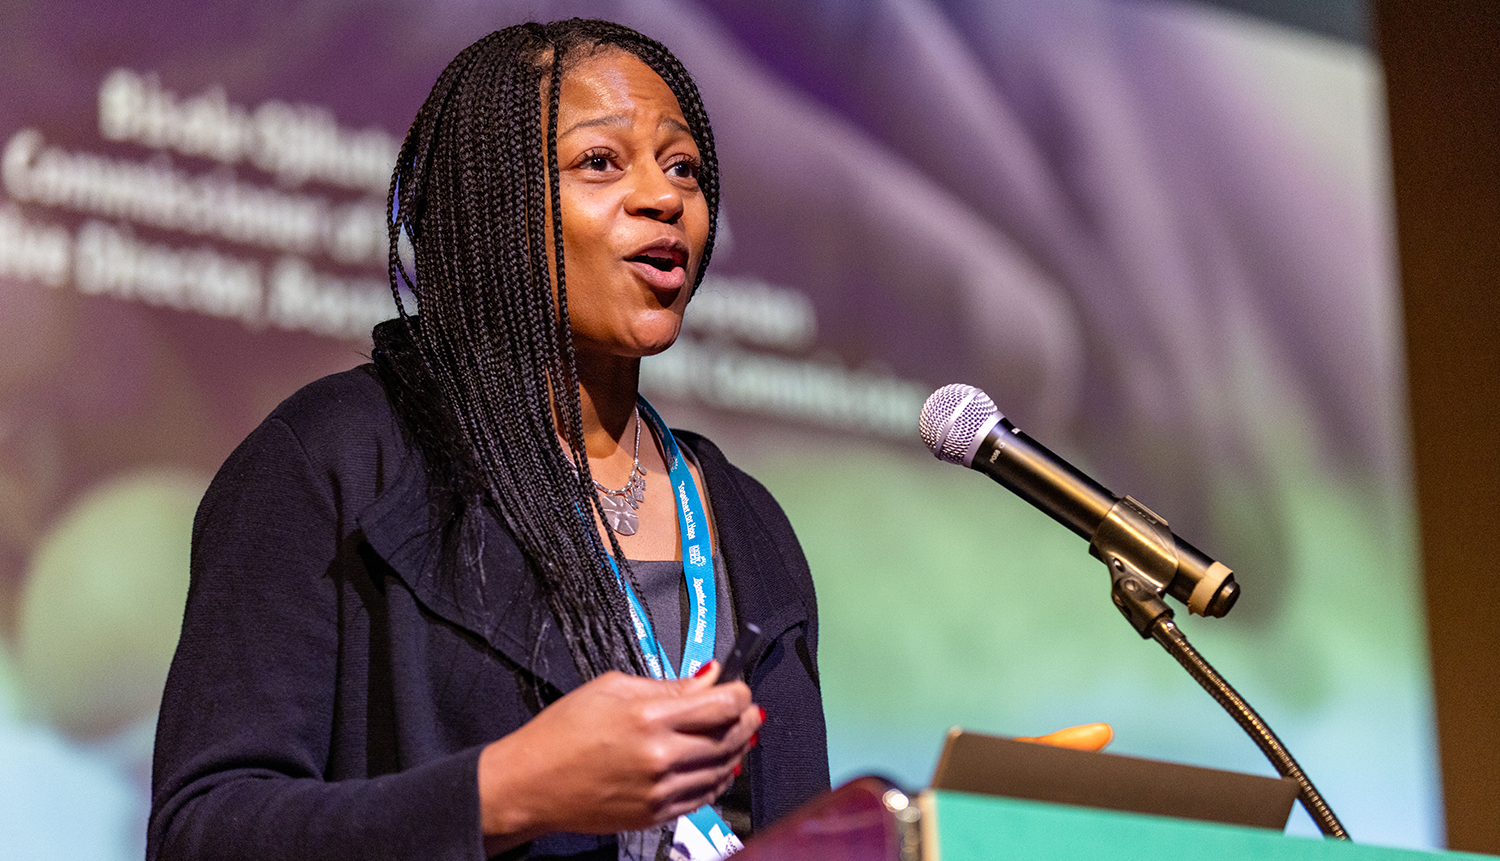 Bisola Ojikutu, a black woman speaking at a podium at the together for hope addiction conference in boston